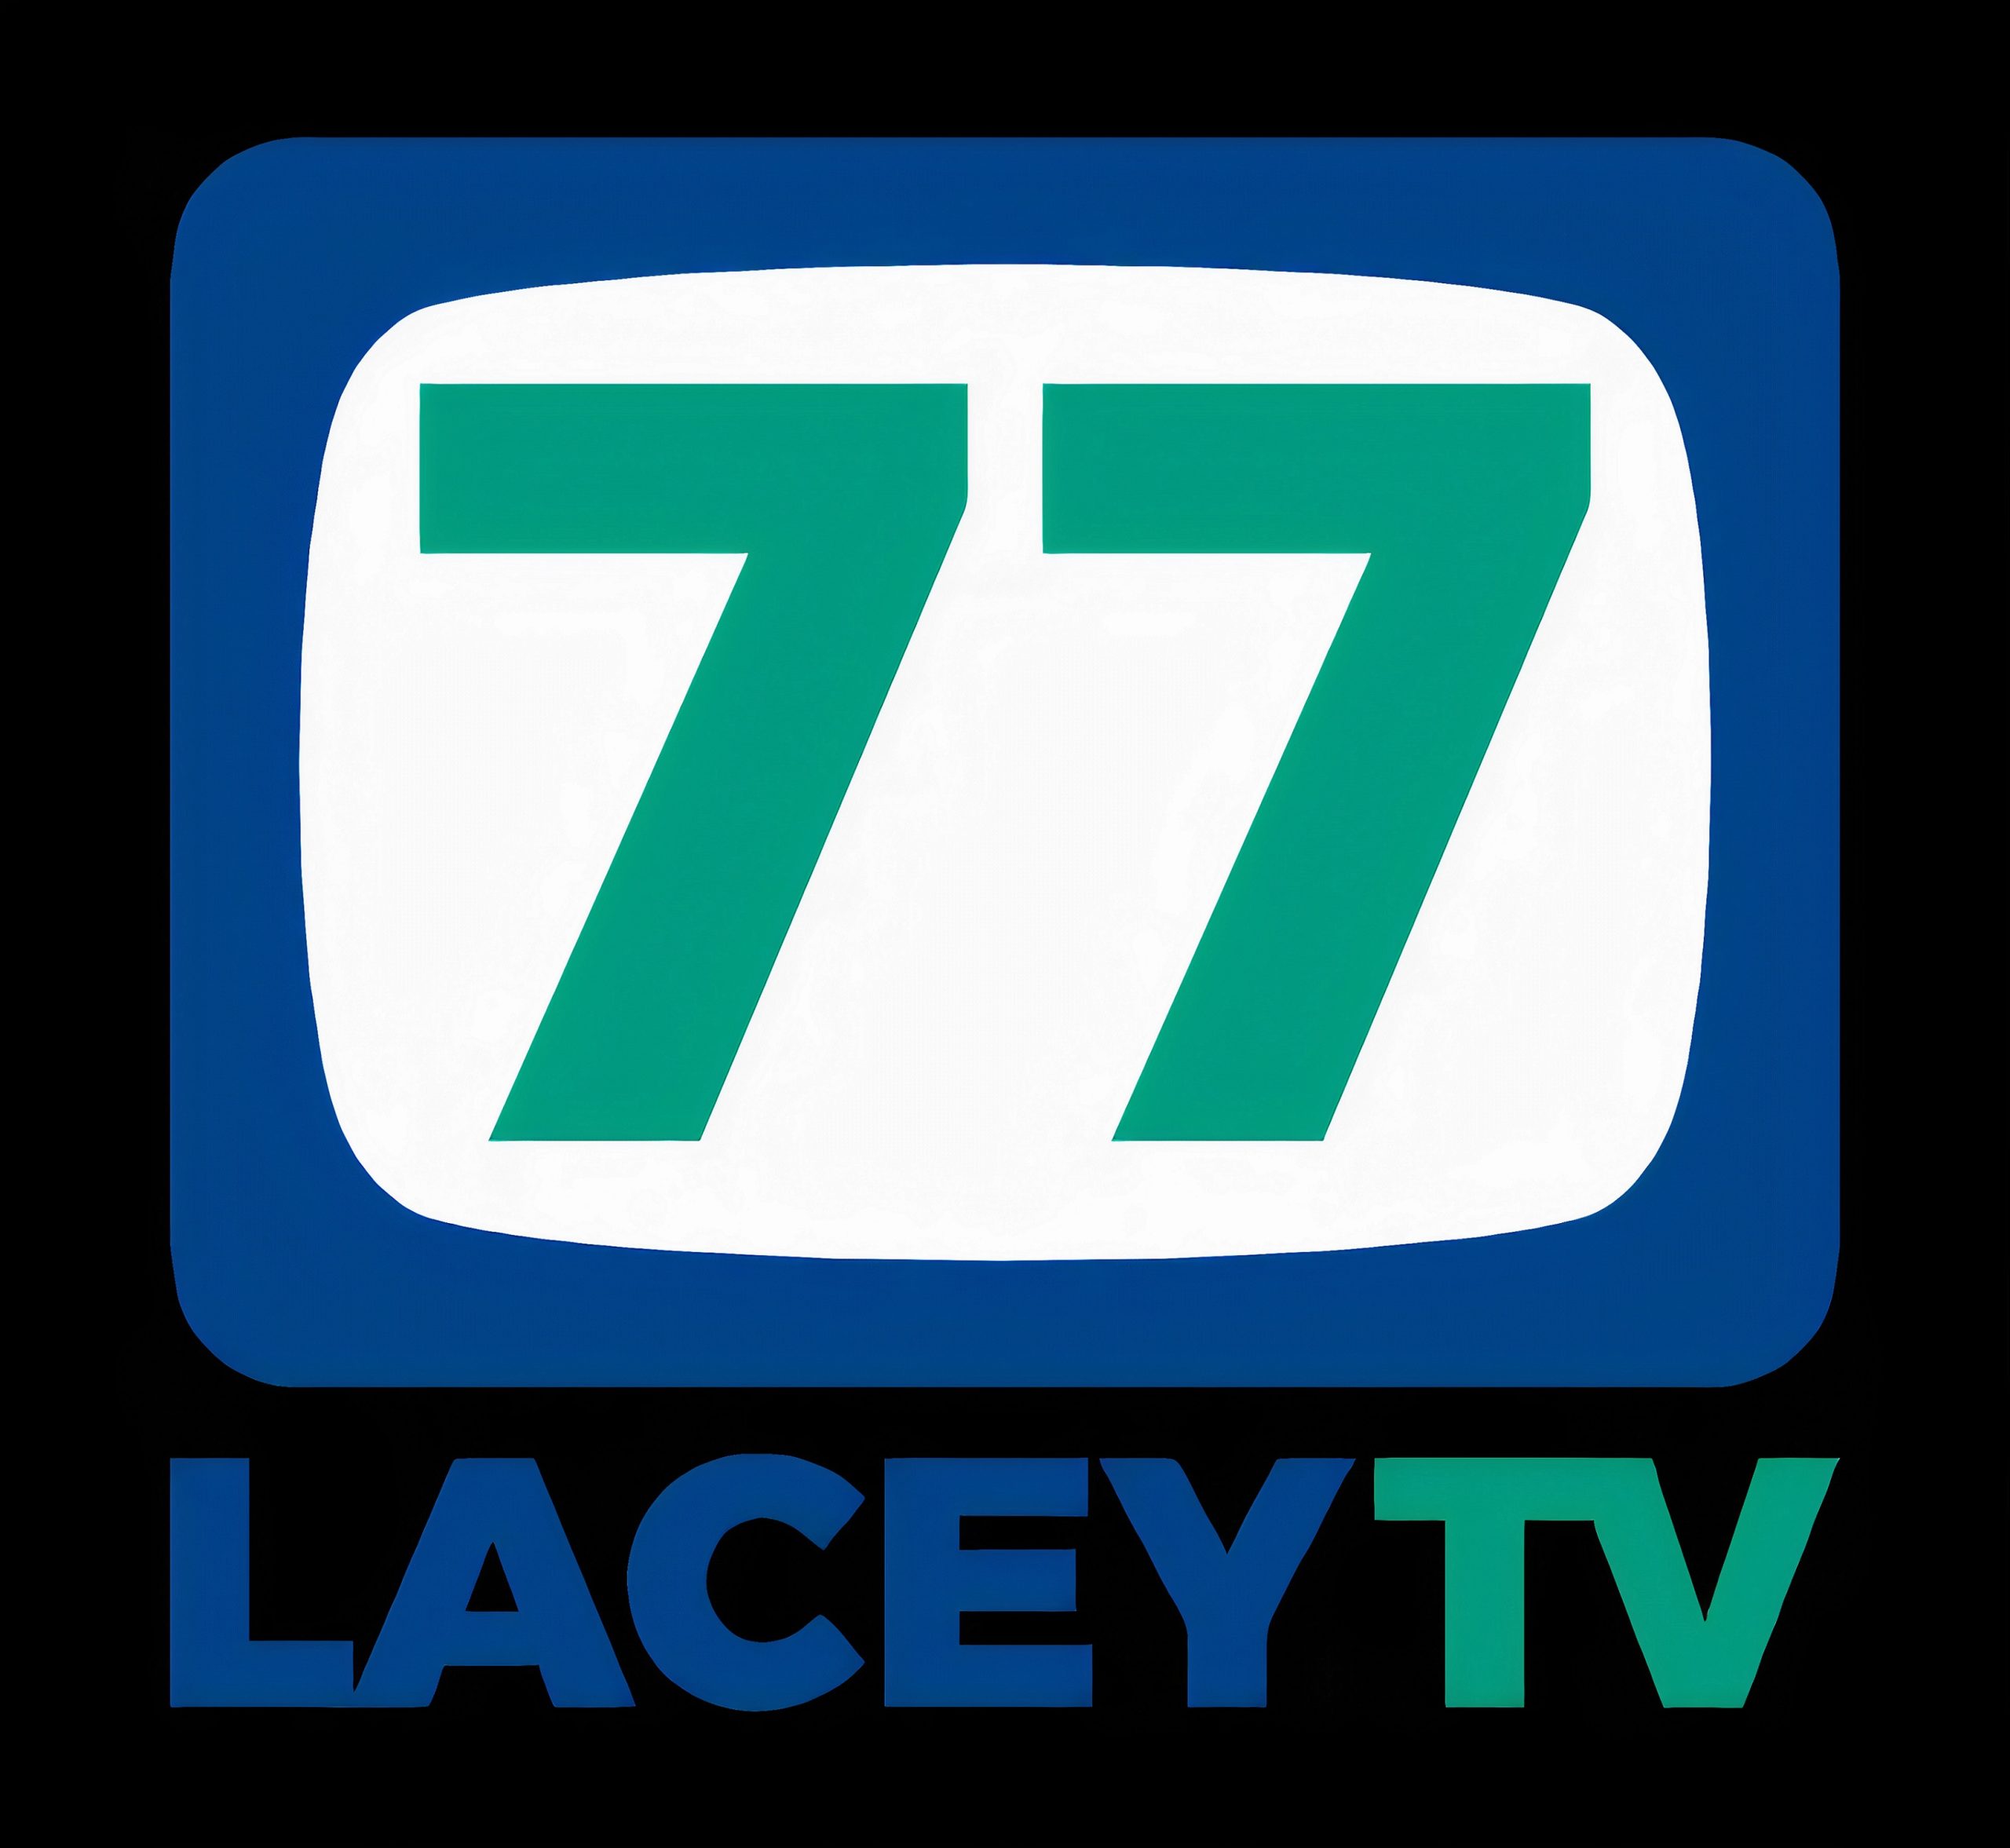 square logo with a tv screen that shows 77 and the words 'LaceyTV' under it